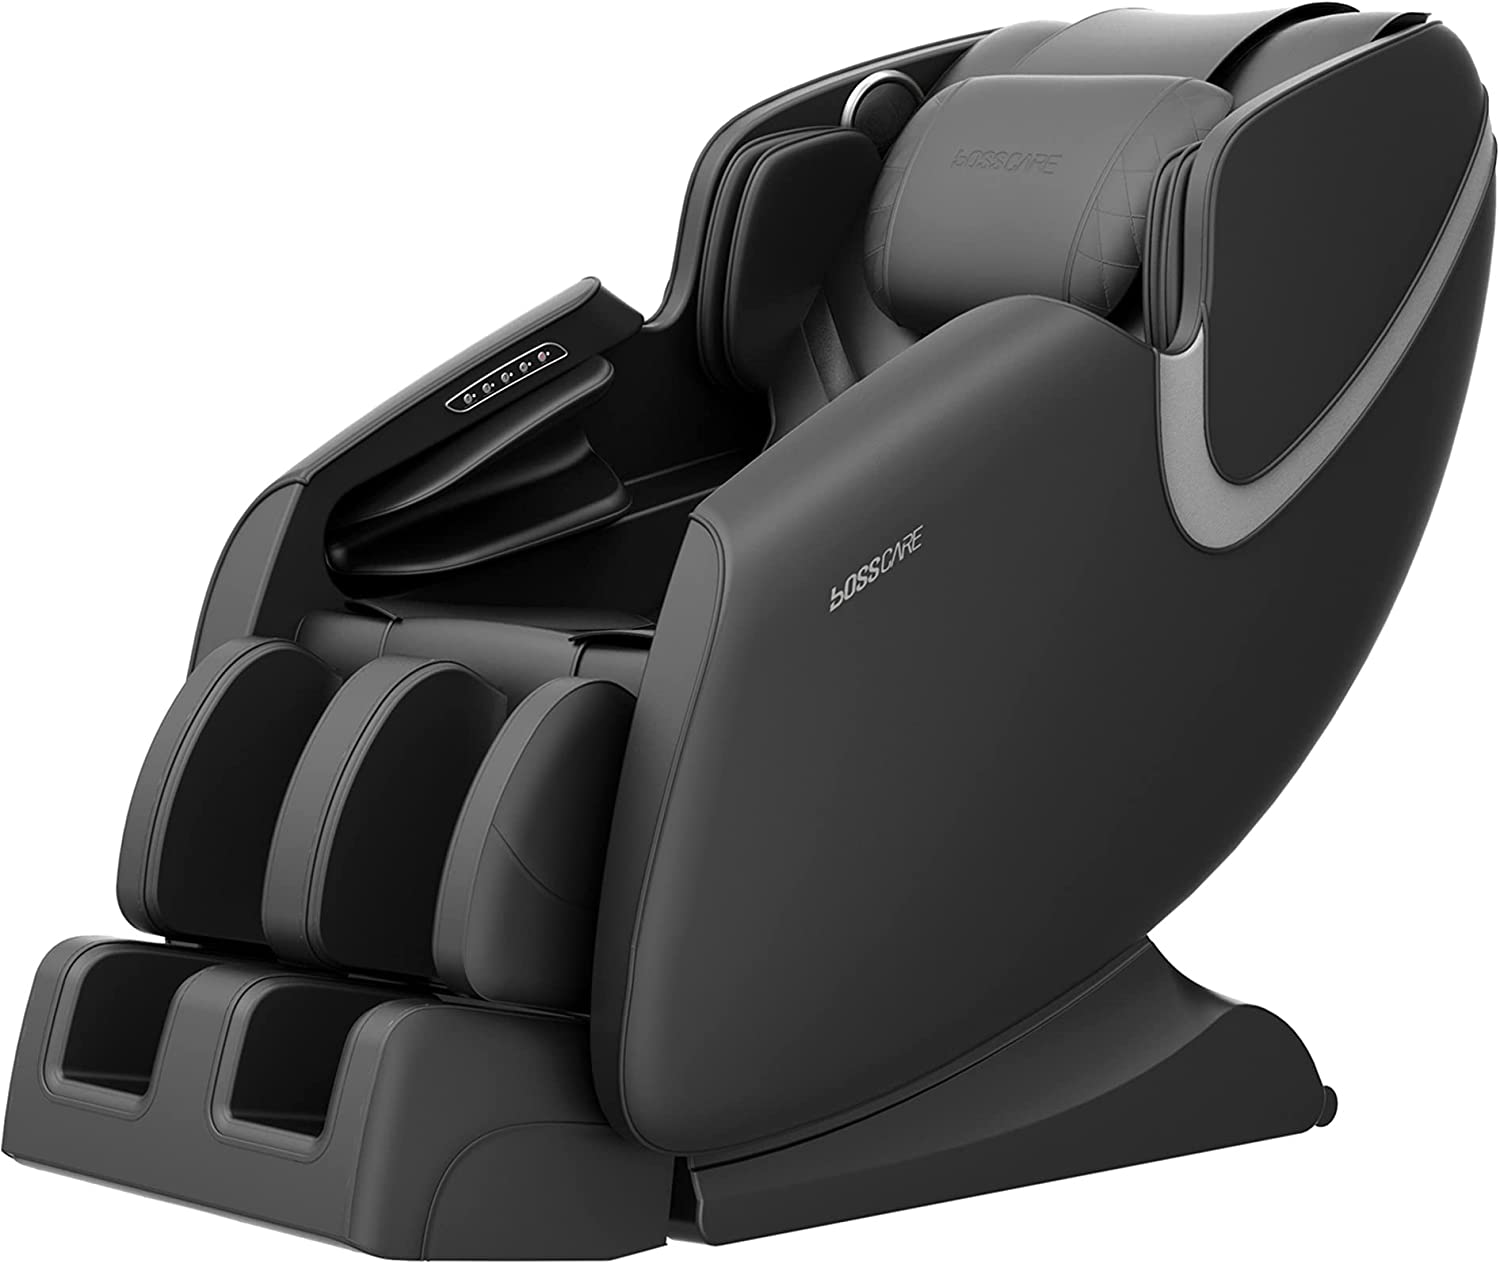 Find The Best Massage Chairs For Your Money